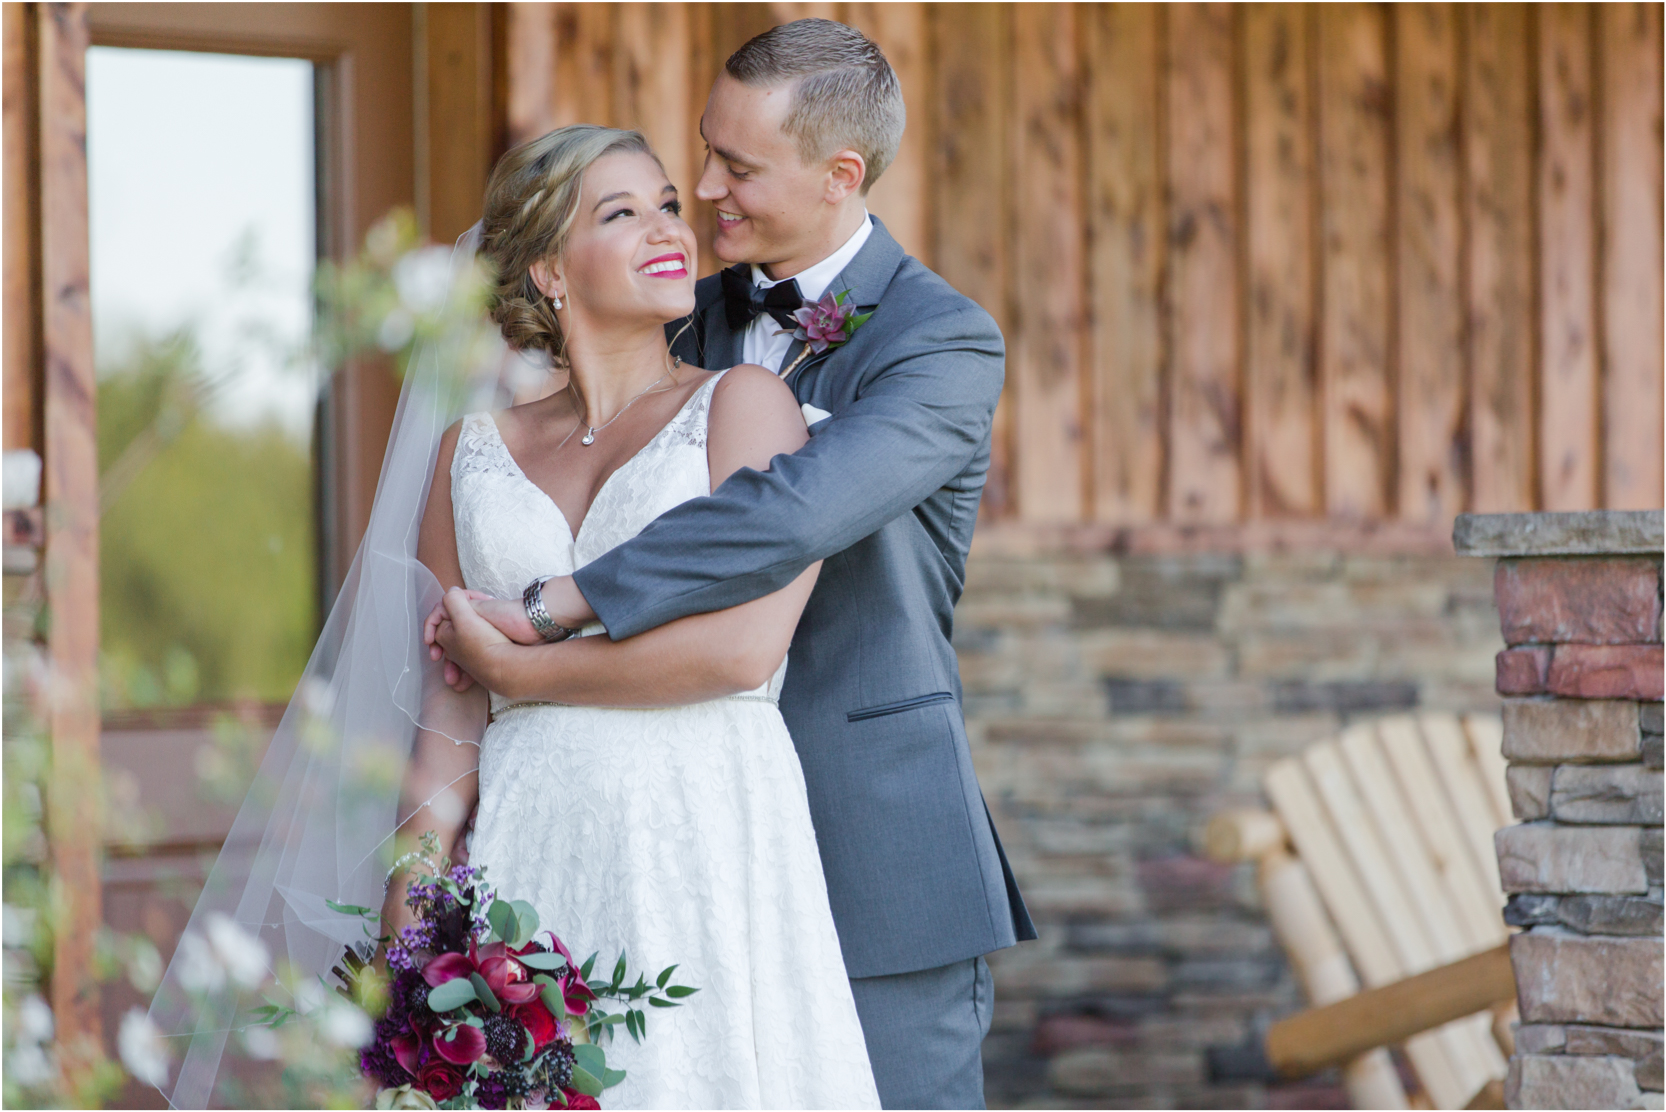 Tuckers Gap Bride and Groom Portraits Outdoor Fall Wedding Photography